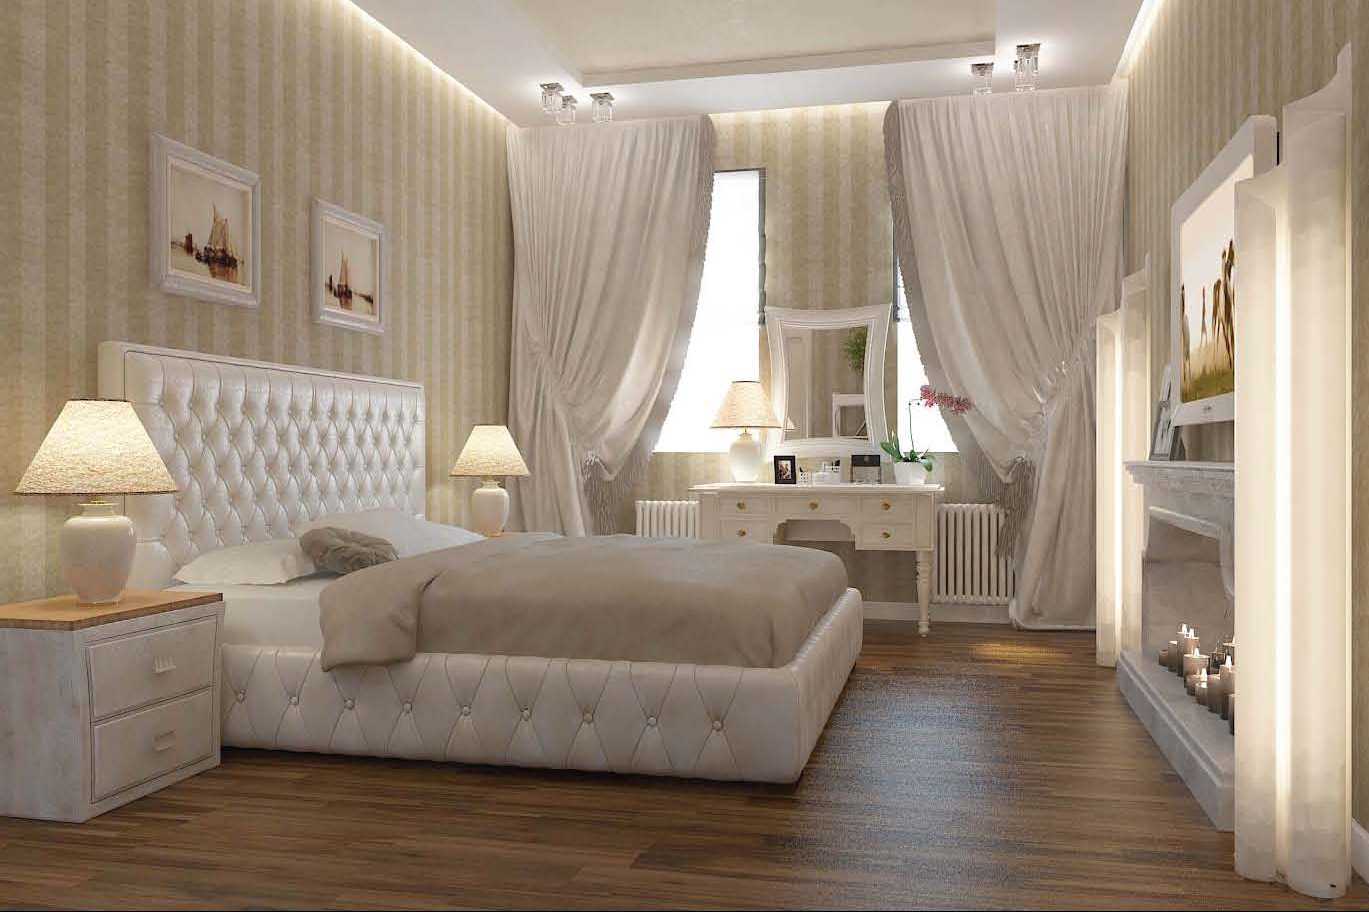 the idea of ​​an unusual beige color in the style of the room